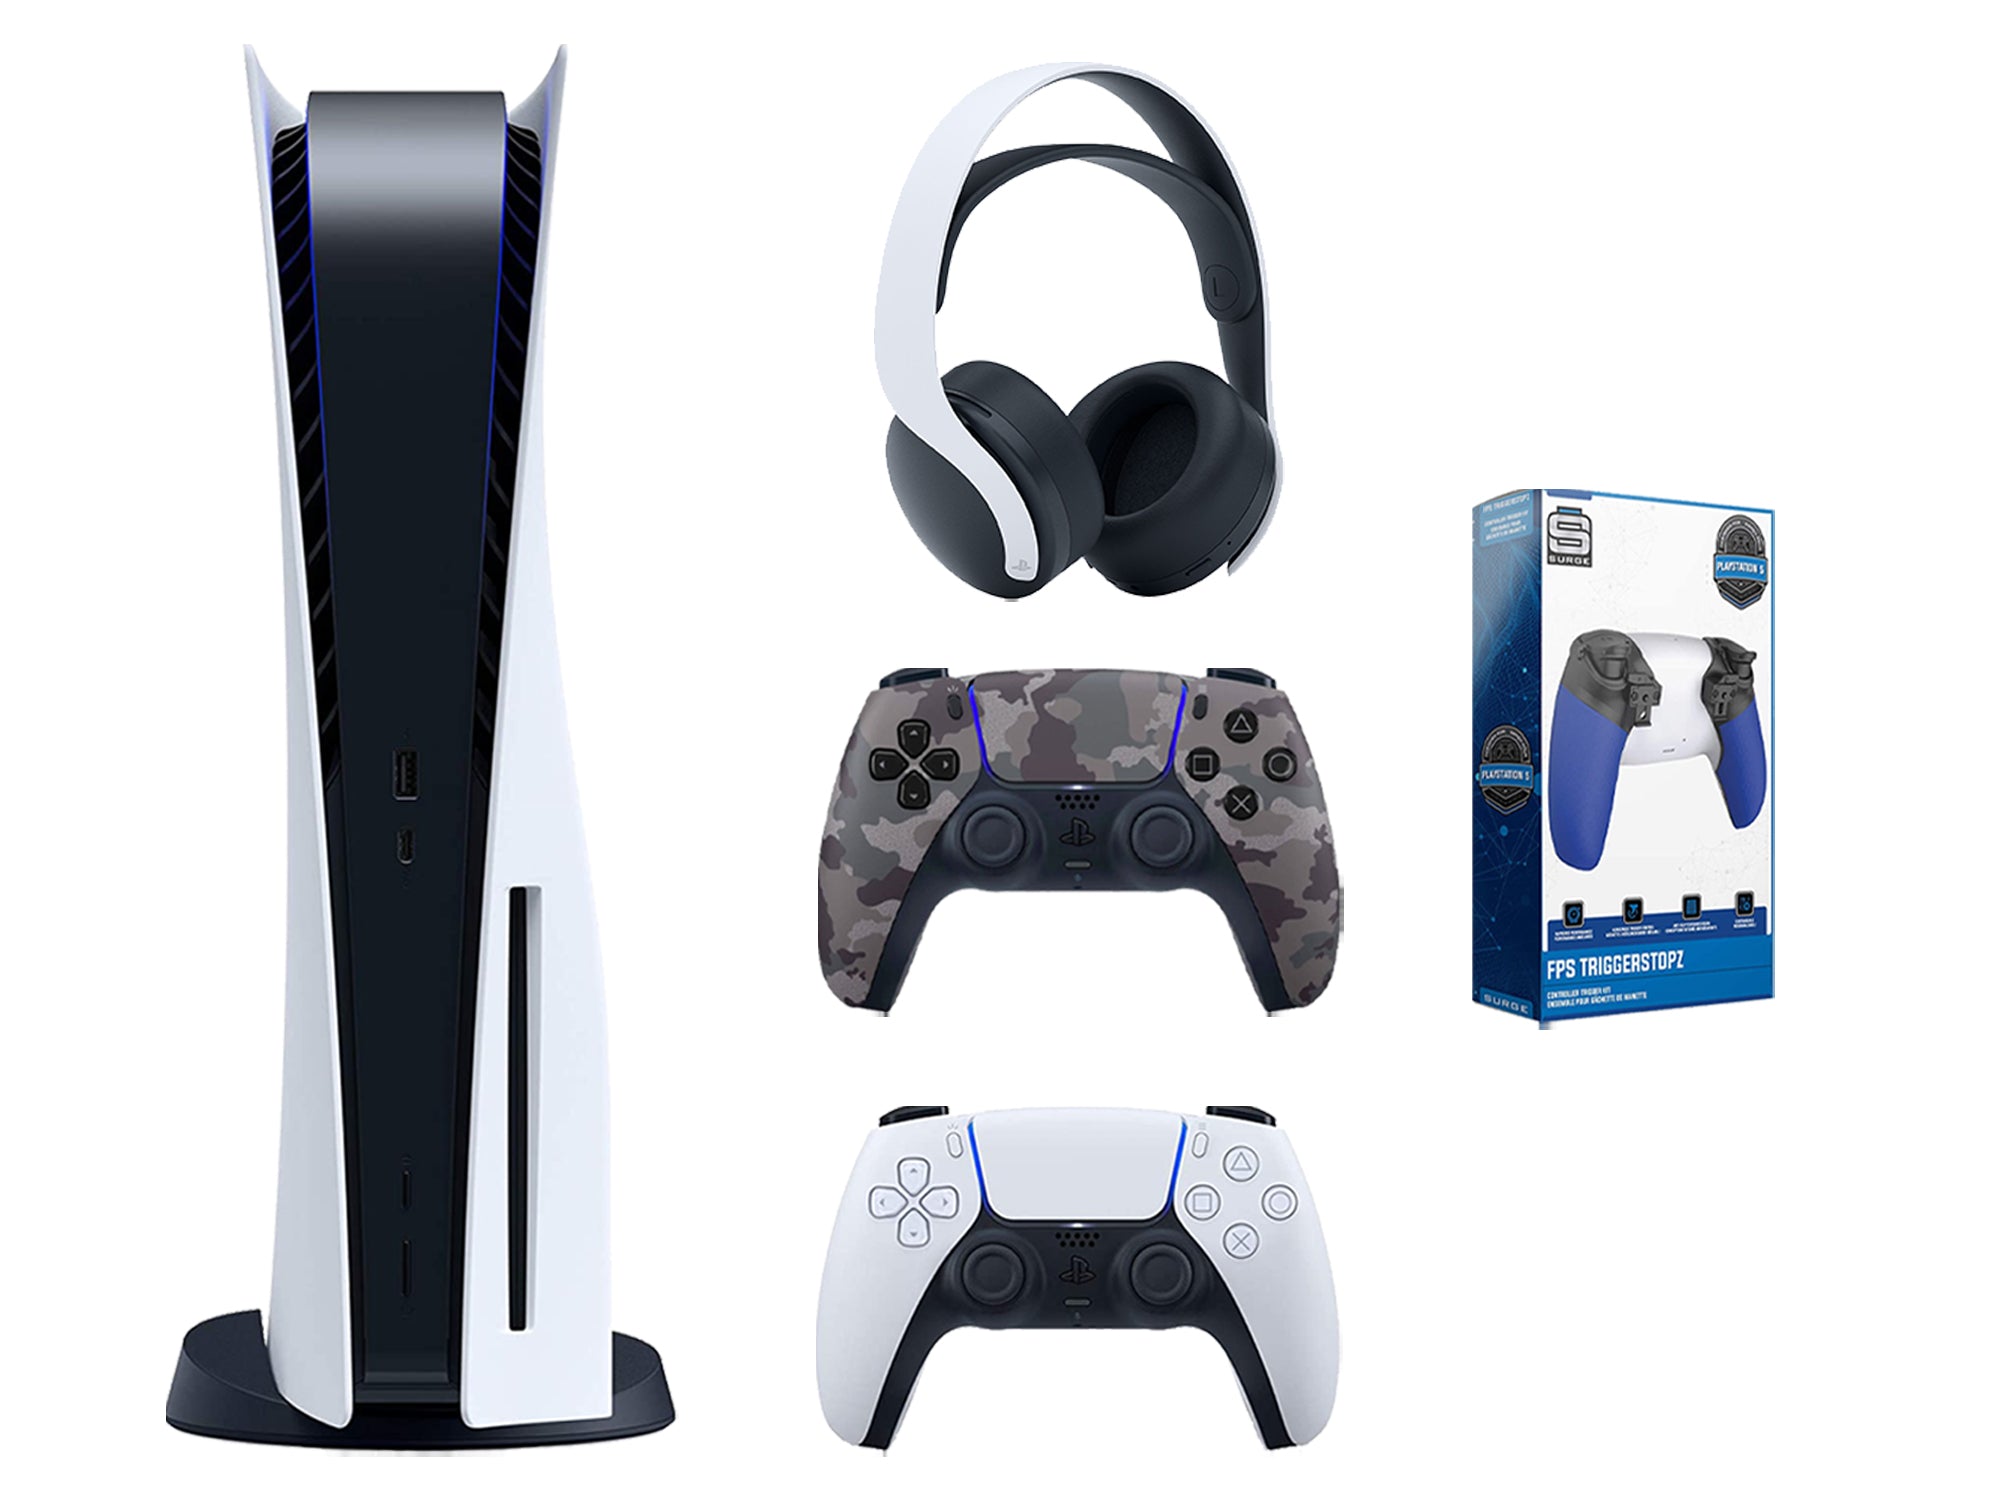 Sony Playstation 5 Disc Edition Bundle with Extra Gray Camo Controller, White PULSE 3D Wireless Headset and Trigger Kit - Pro-Distributing